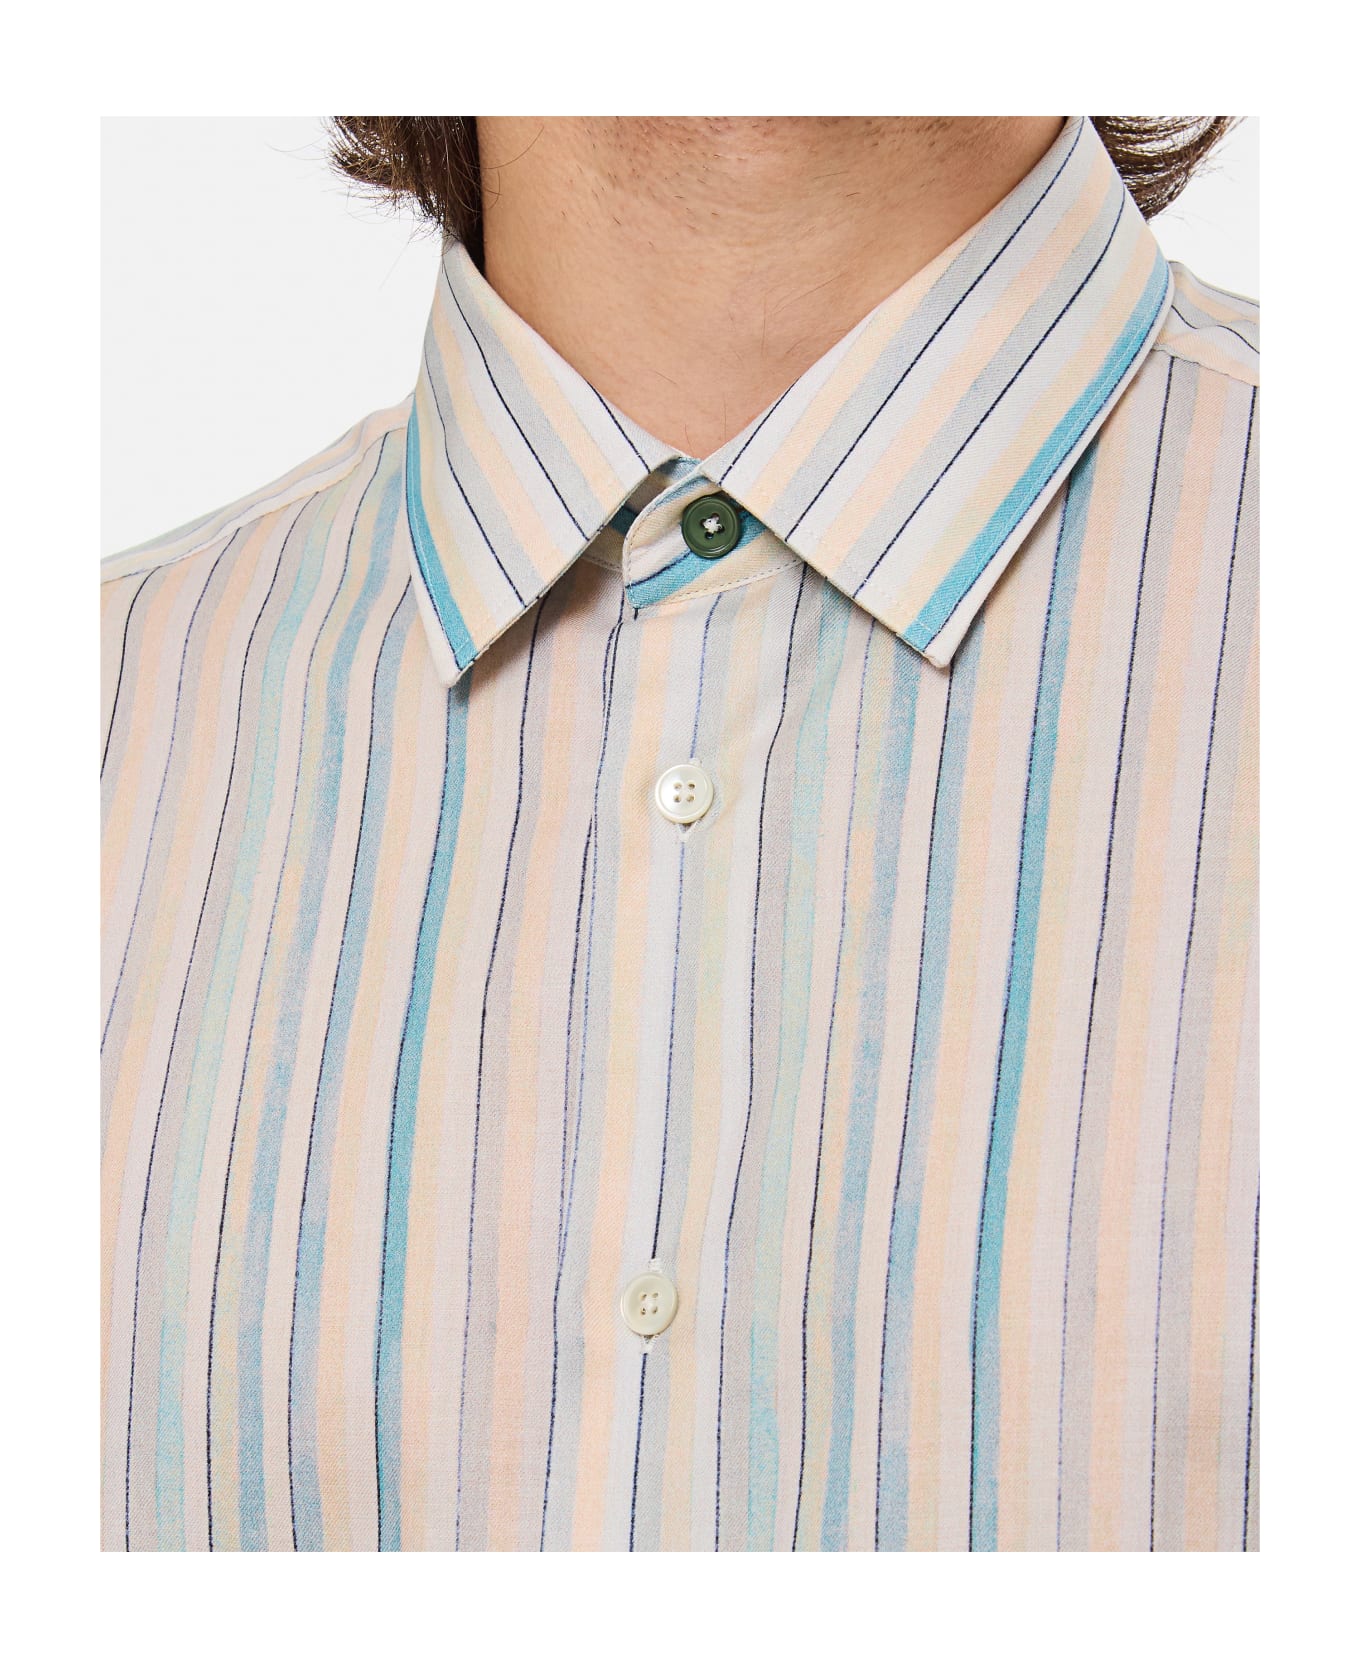 Paul Smith Mens S/c Tailored Fit Shirt - MultiColour シャツ